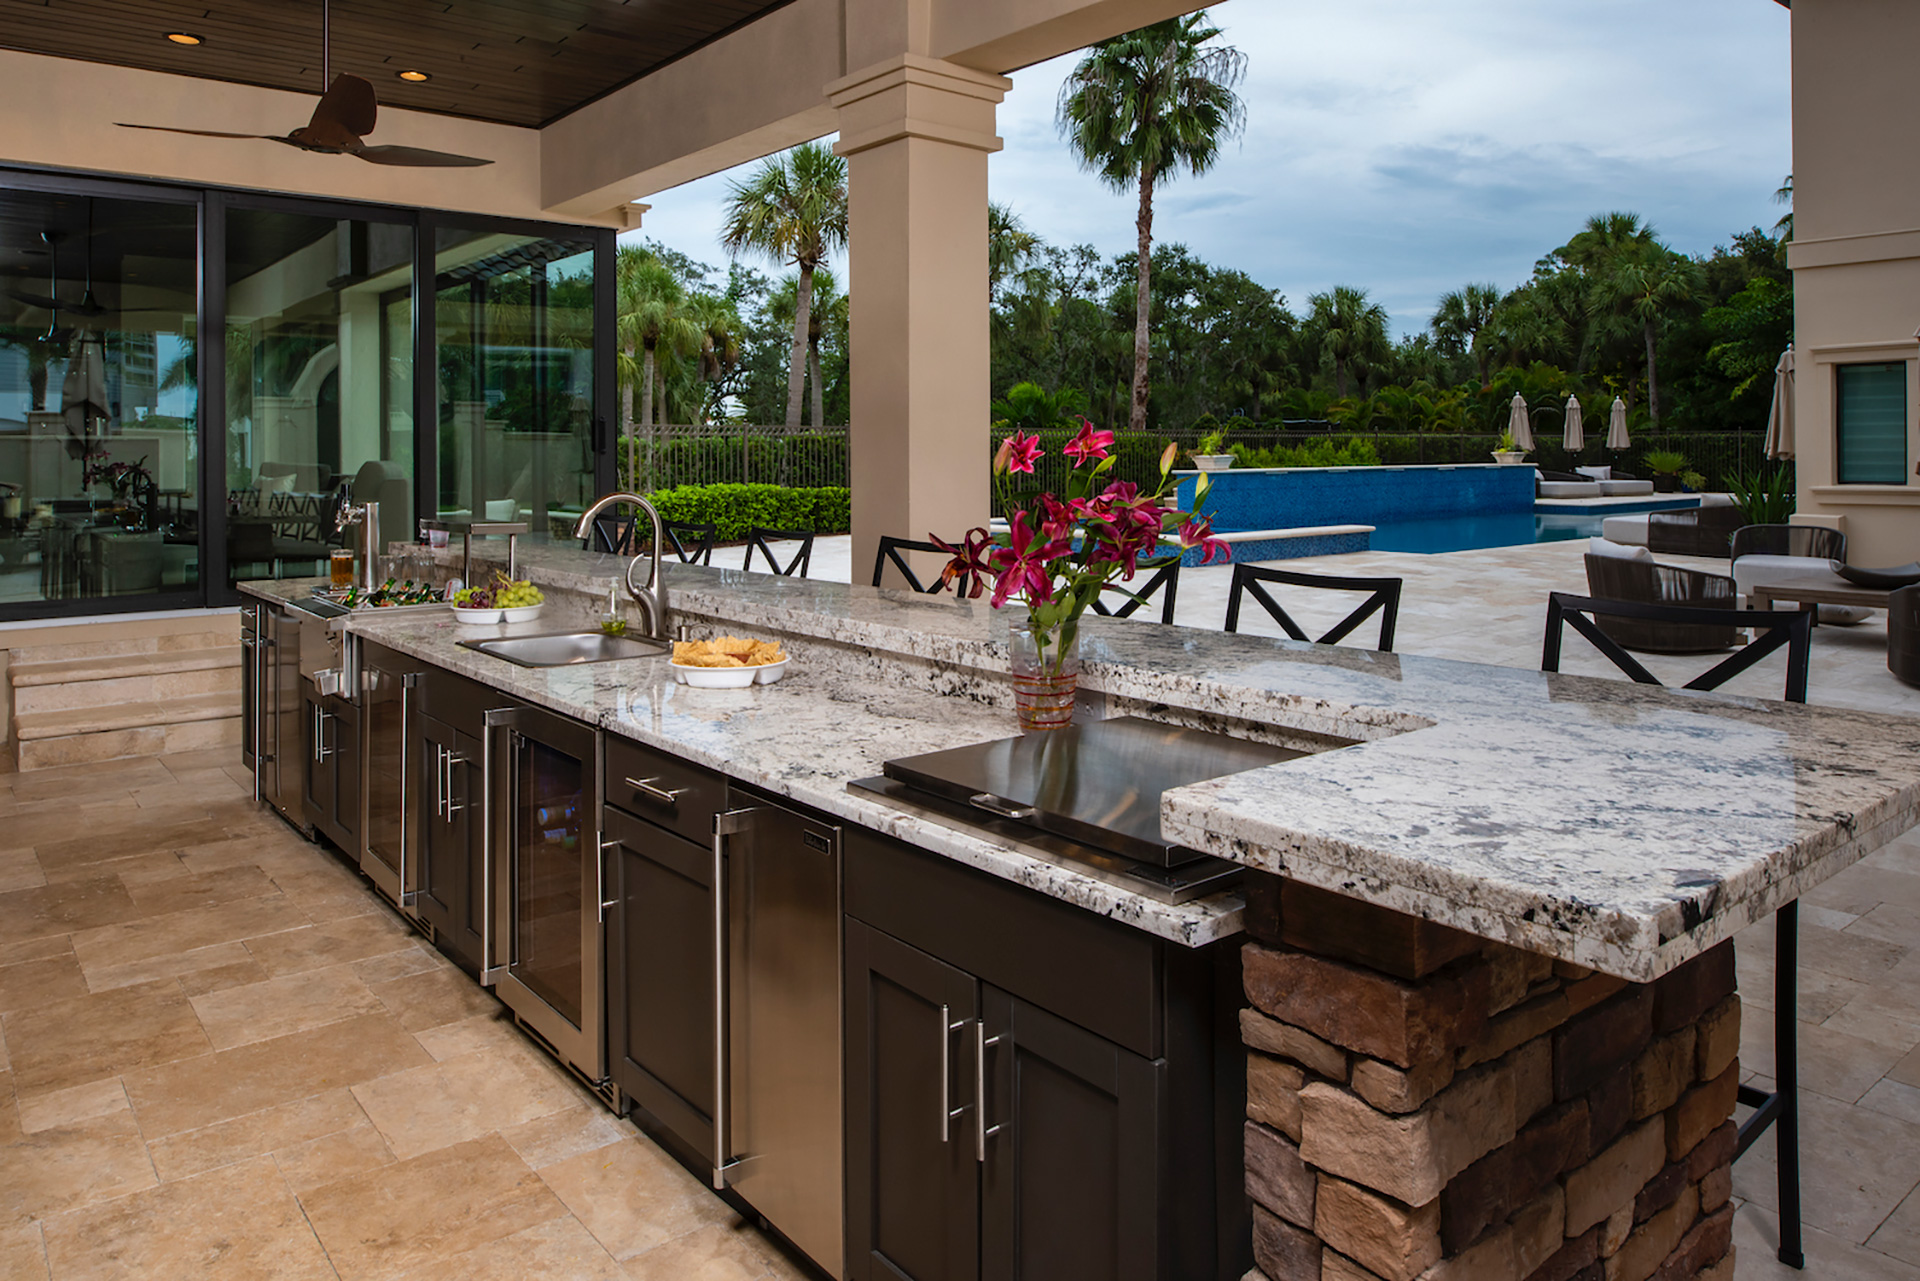 Uncover 74+ Alluring outdoor kitchen design with granite countertops You Won't Be Disappointed